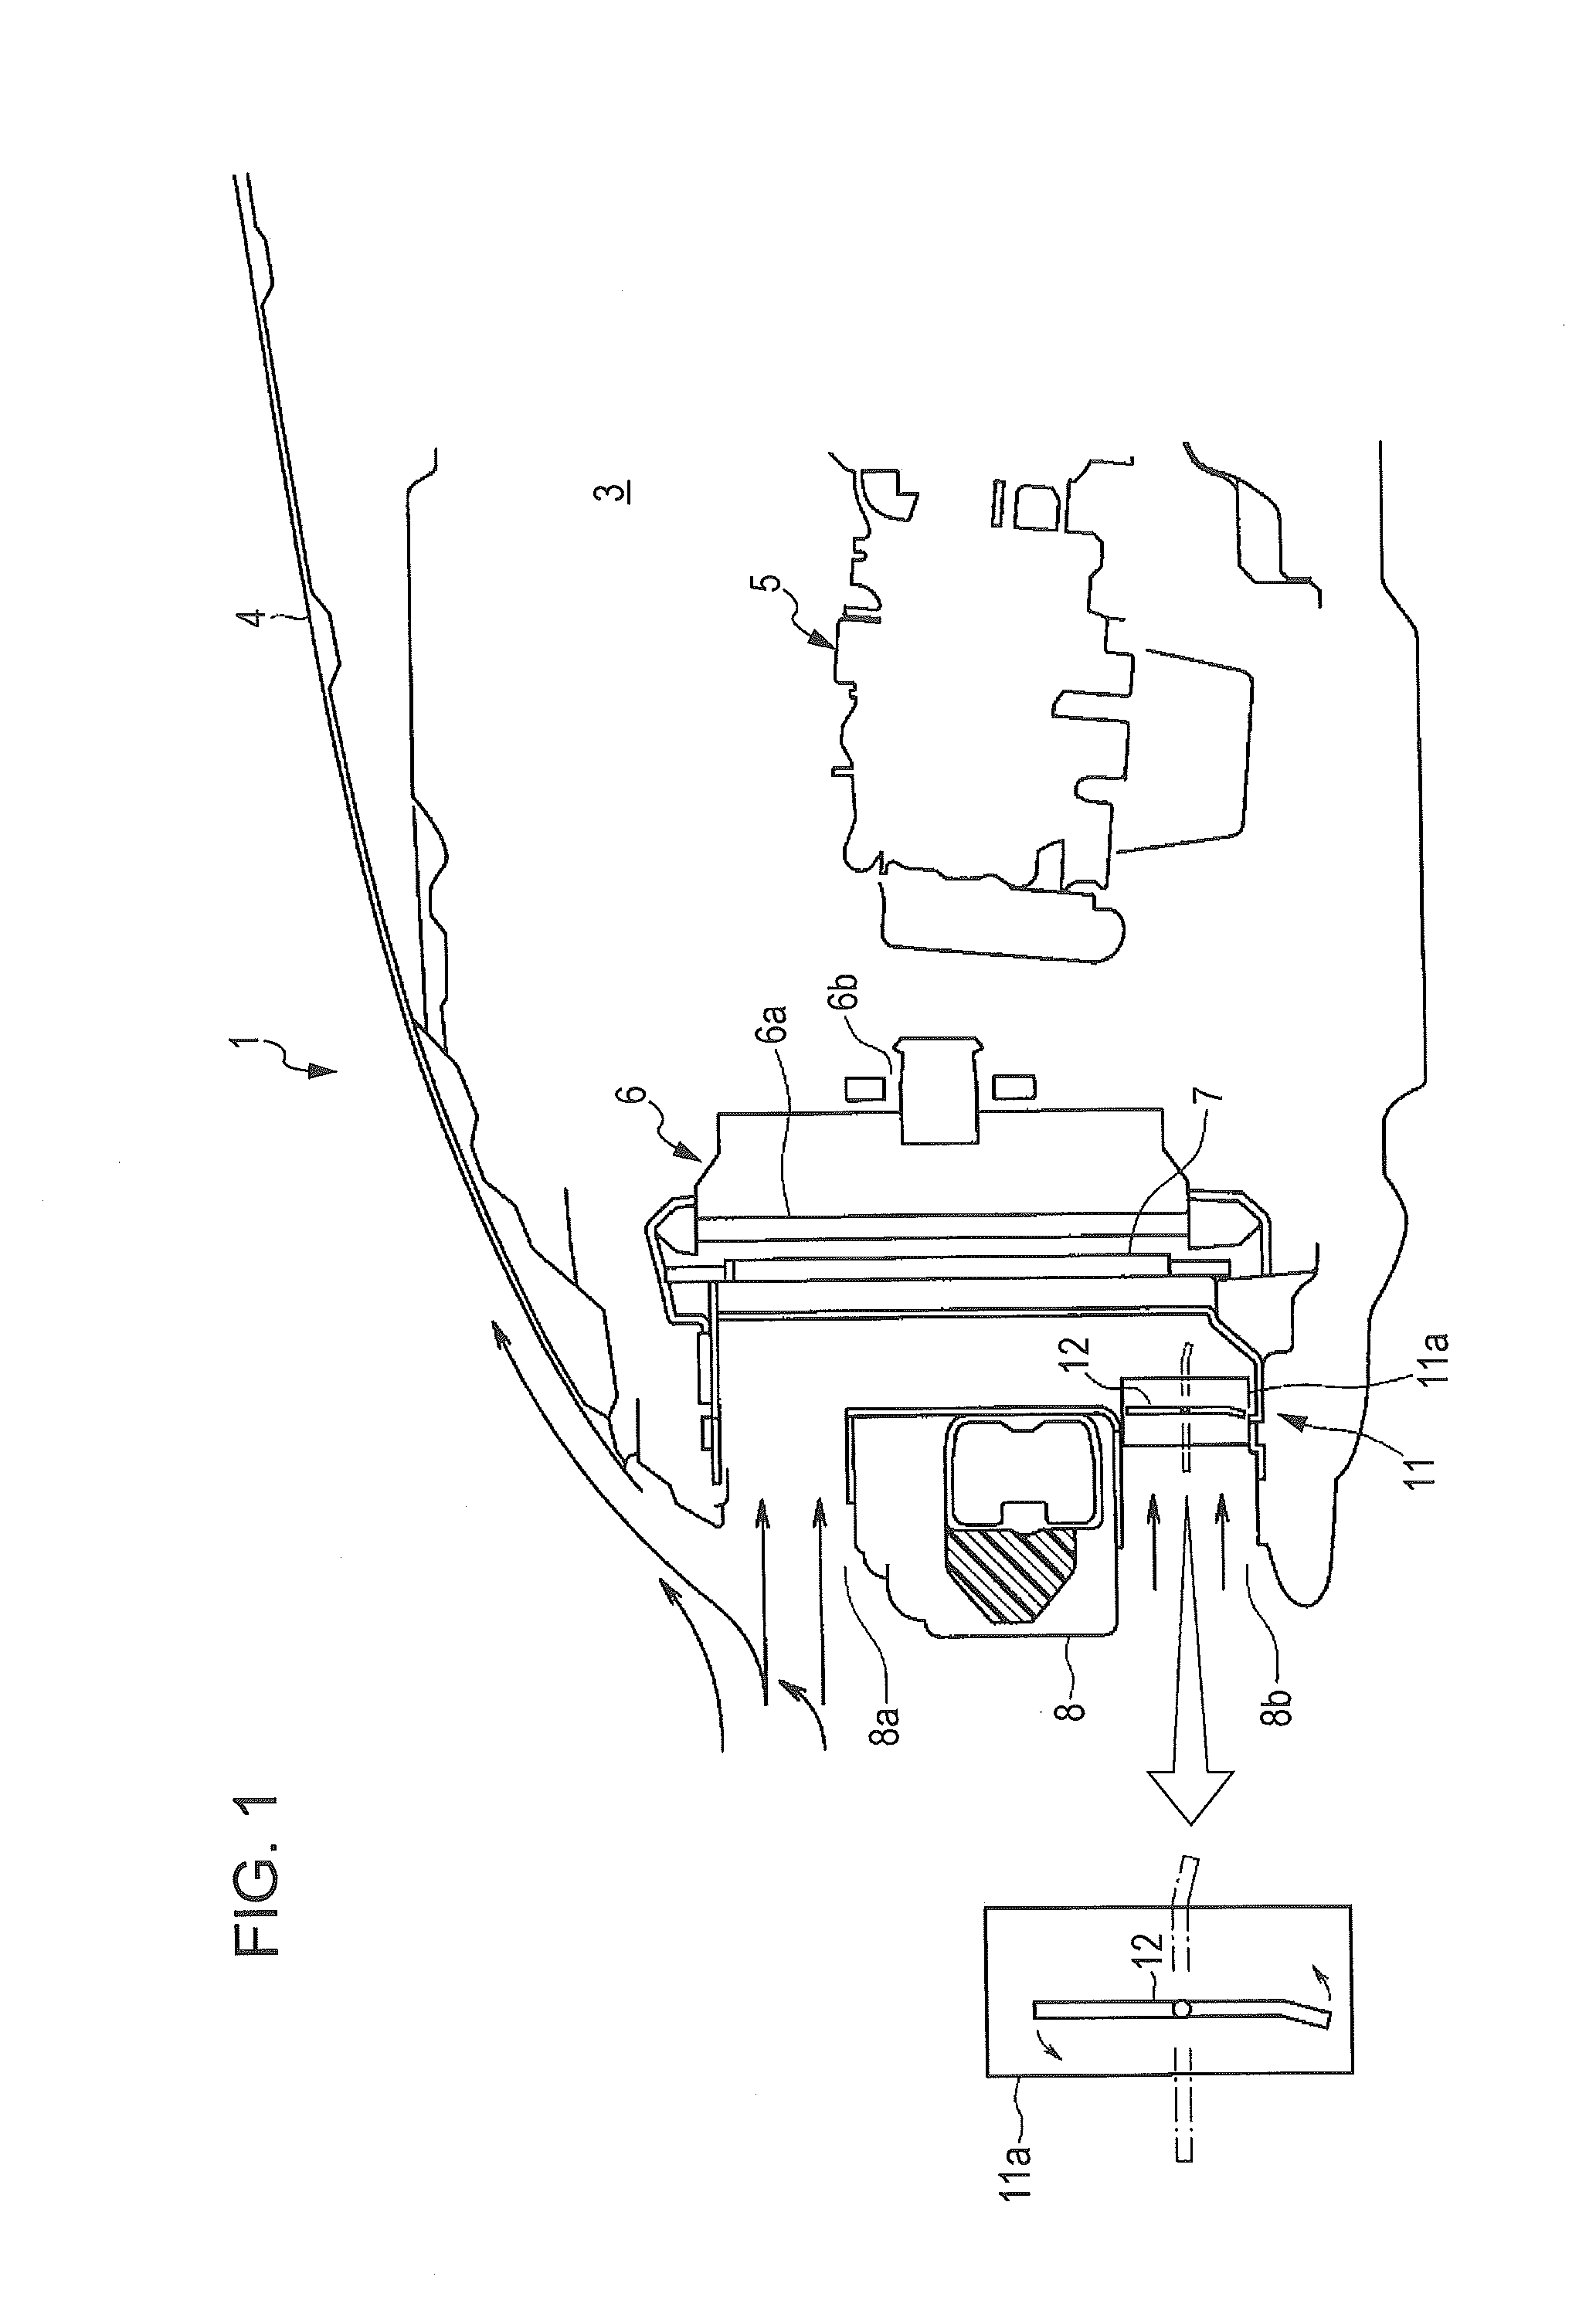 Freeze detecting device for active shutter of vehicle